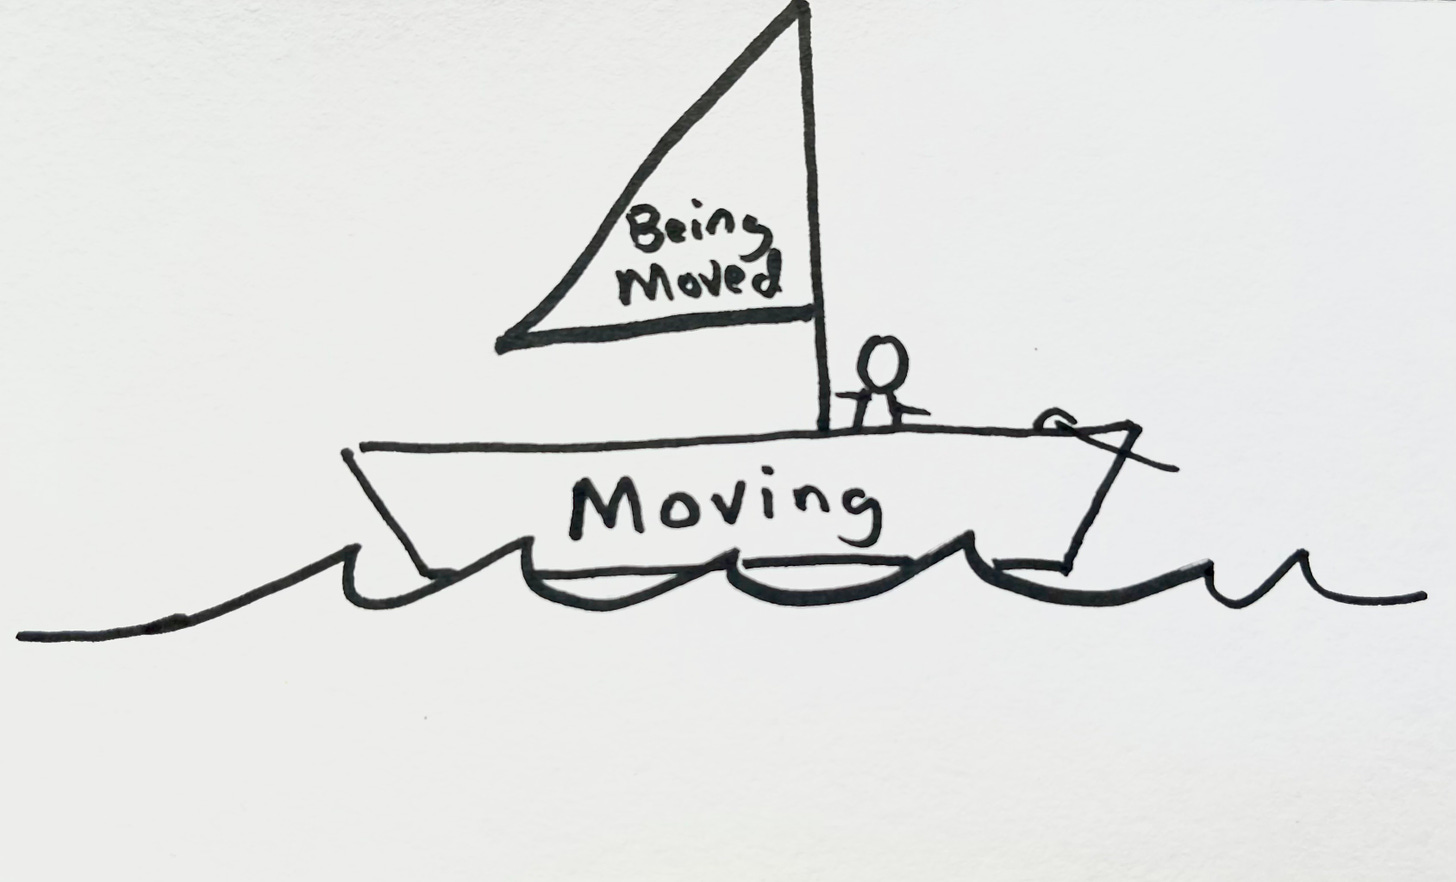 Sailboat_Moving and Being Moved.jpg